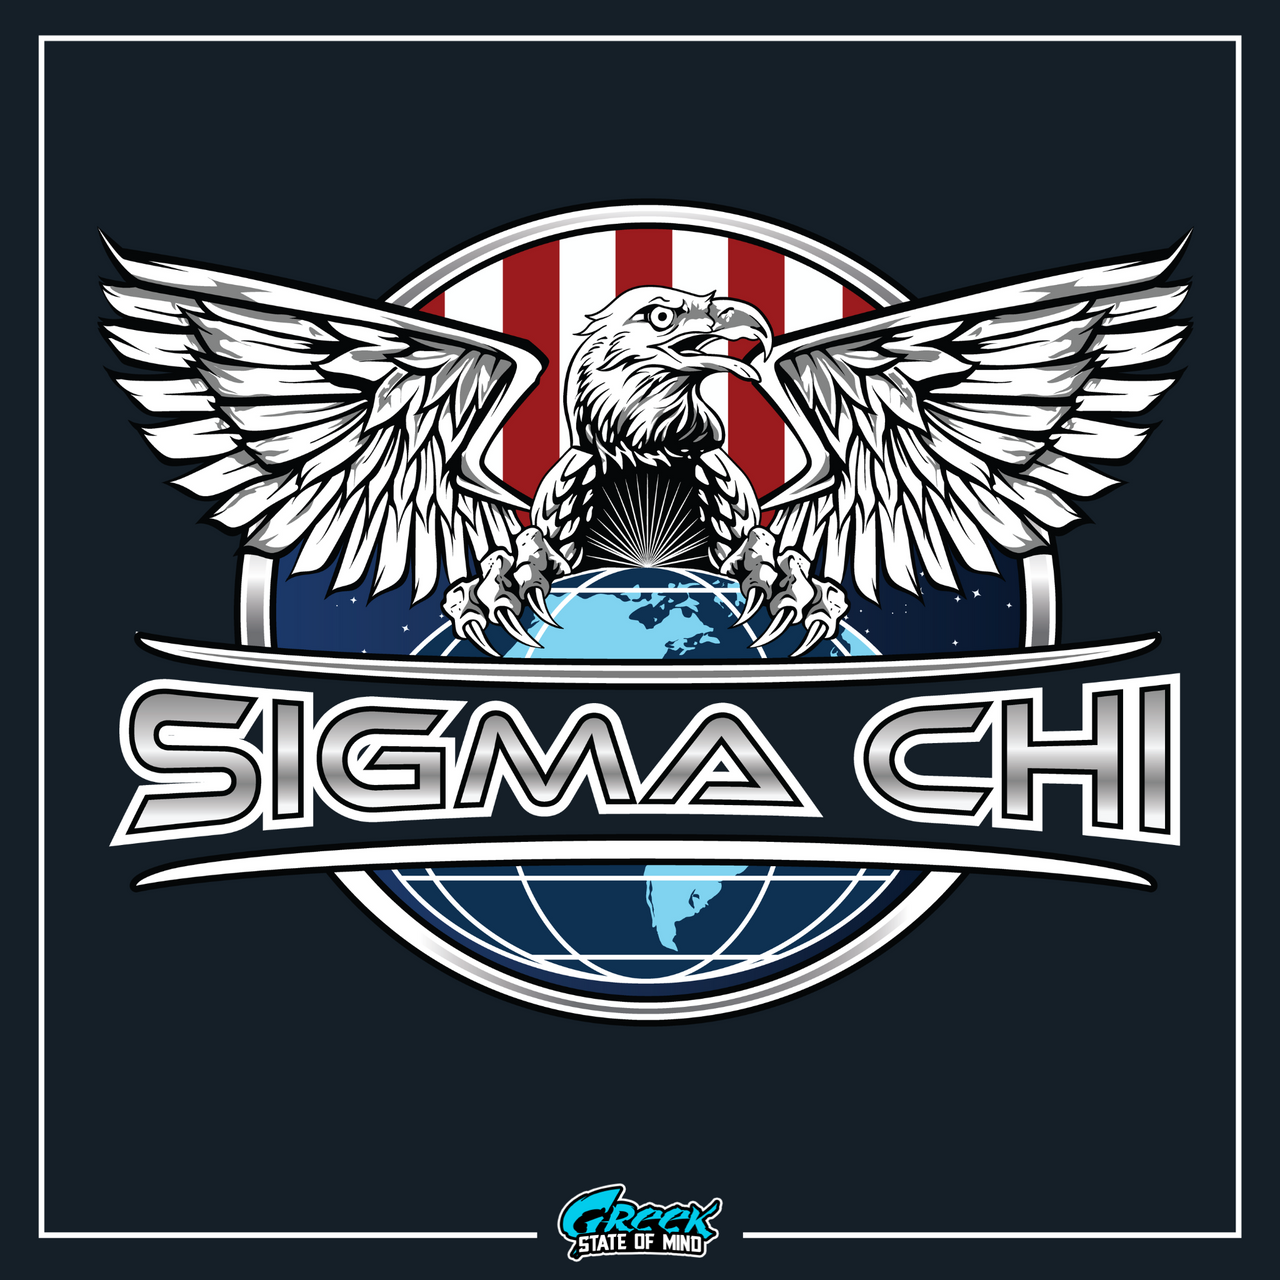 Sigma Chi Graphic Crewneck Sweatshirt | The Fraternal Order | Sigma Chi Fraternity Merch House design